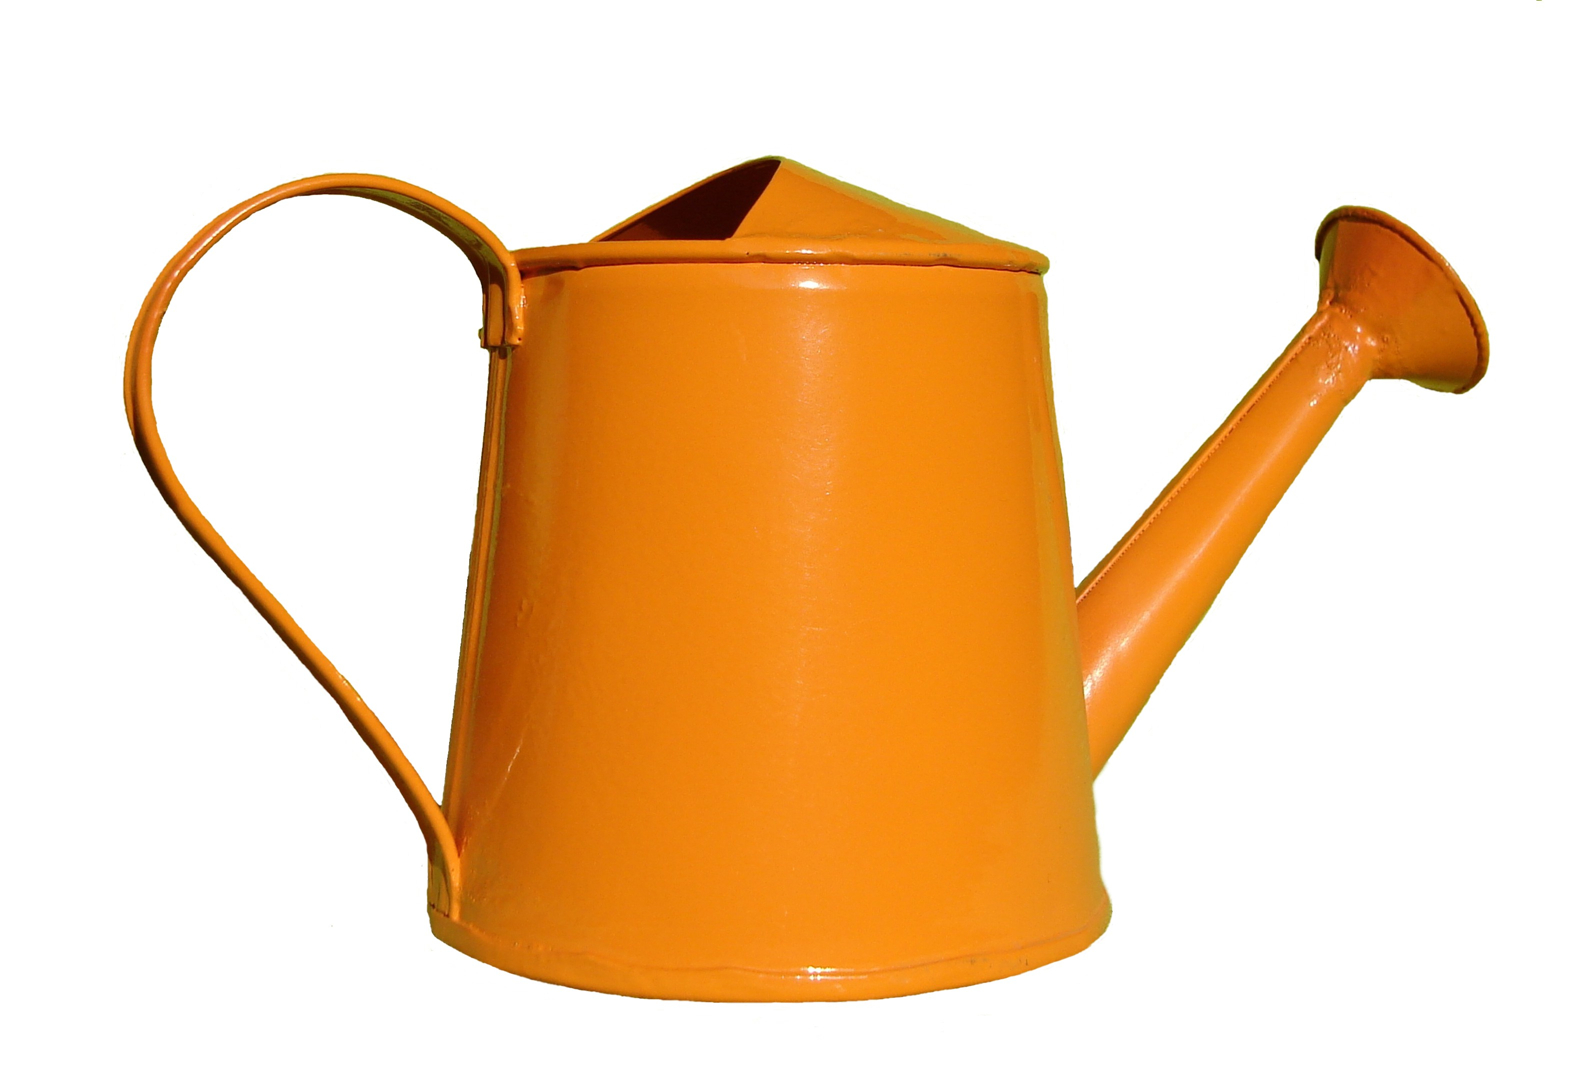 Watering Can Clip Art | Clipart library - Free Clipart Images